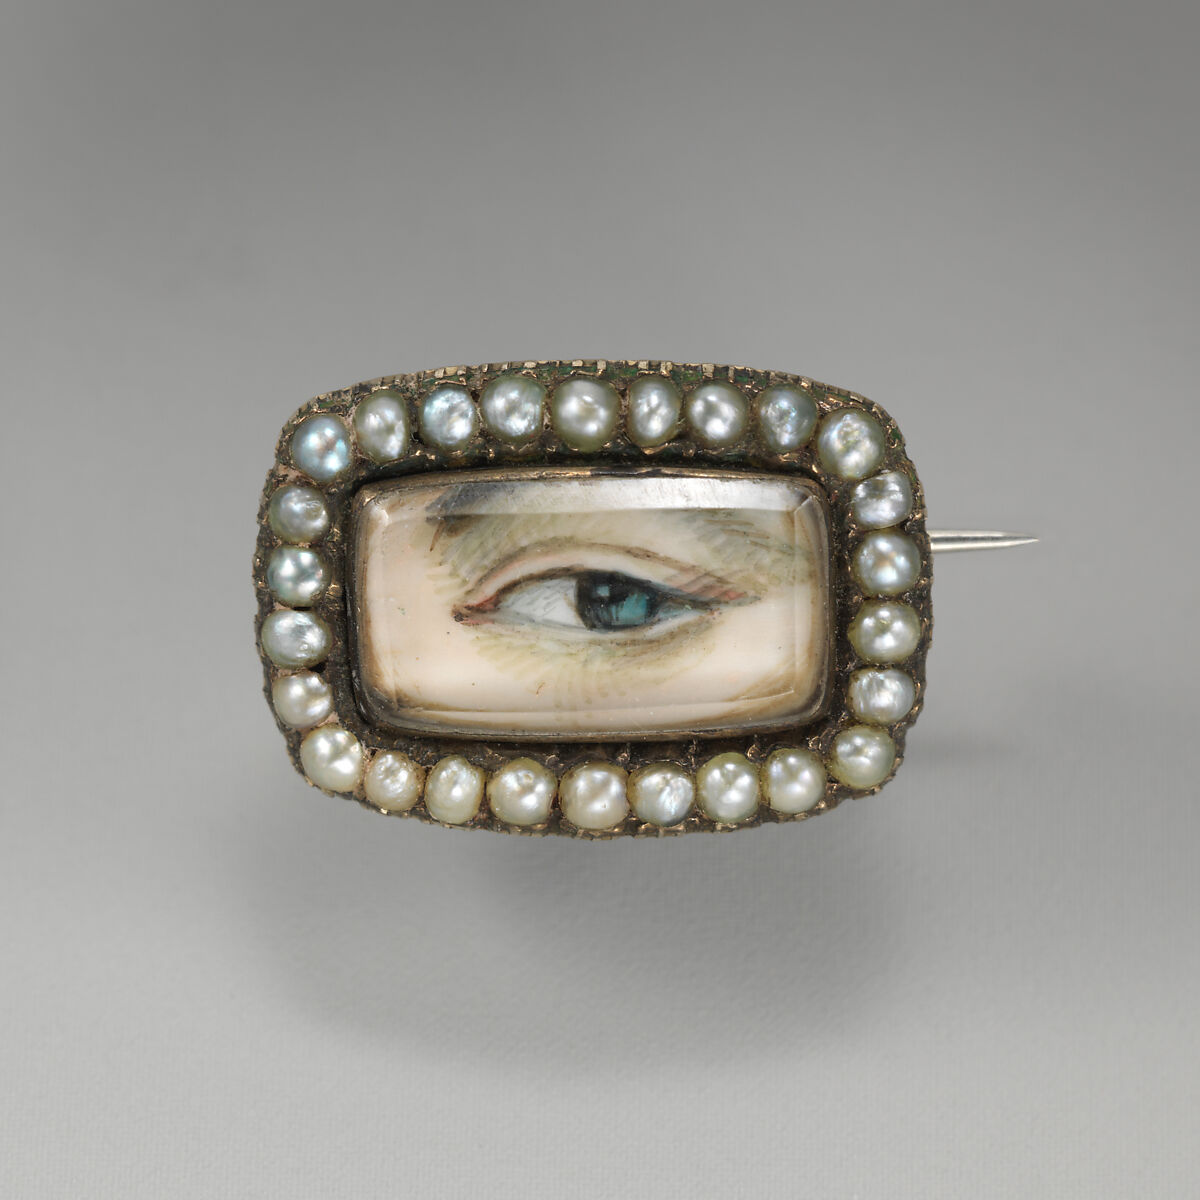 "Eye" brooch, Portrait miniature possibly on ivory; pearls; rock crystal; gold, English 